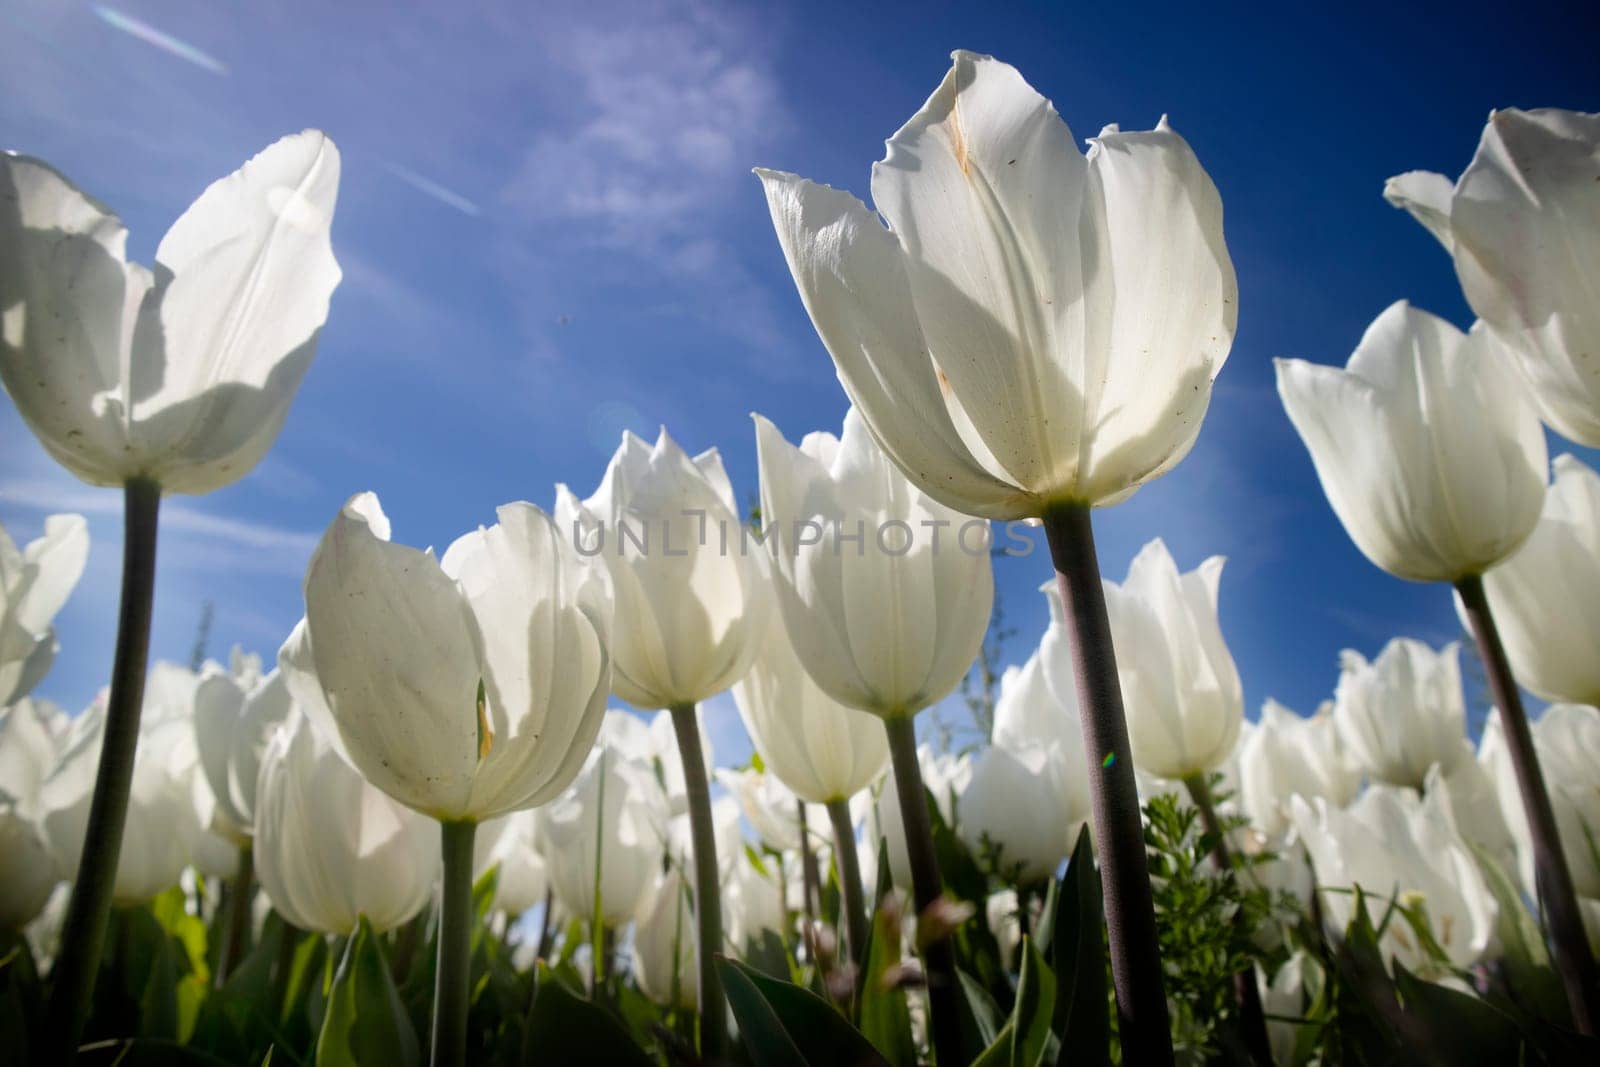 Photographic documentation of the field cultivation of the white tulip 